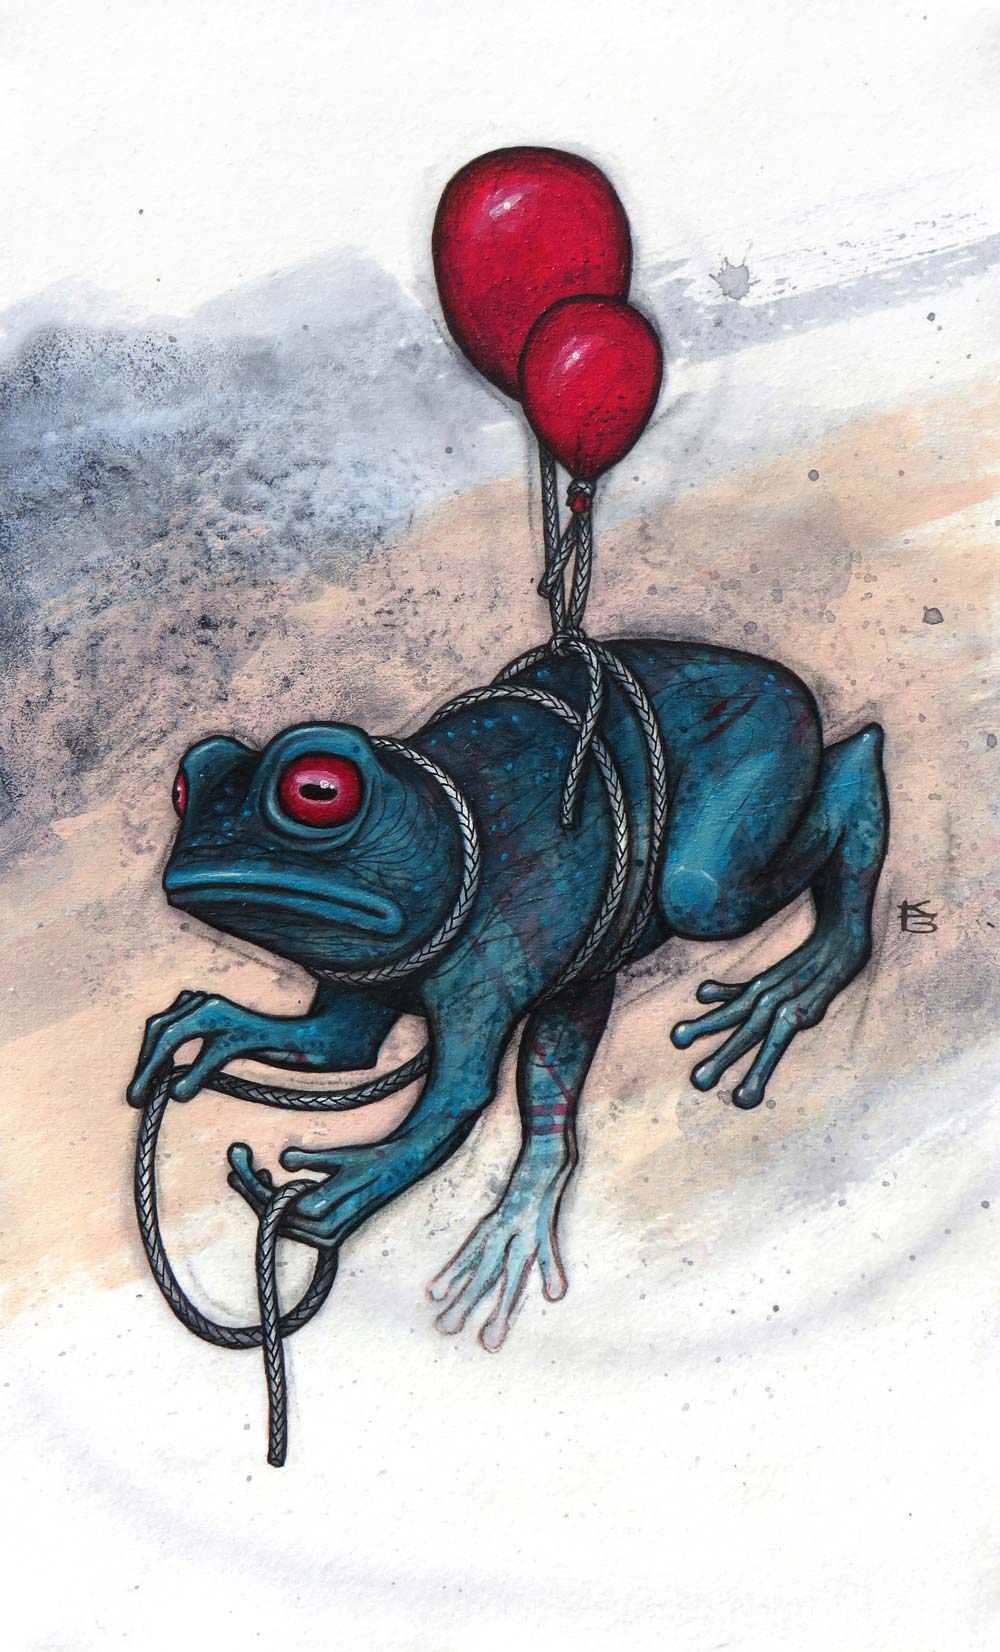 A frog attached to balloons floating in the air